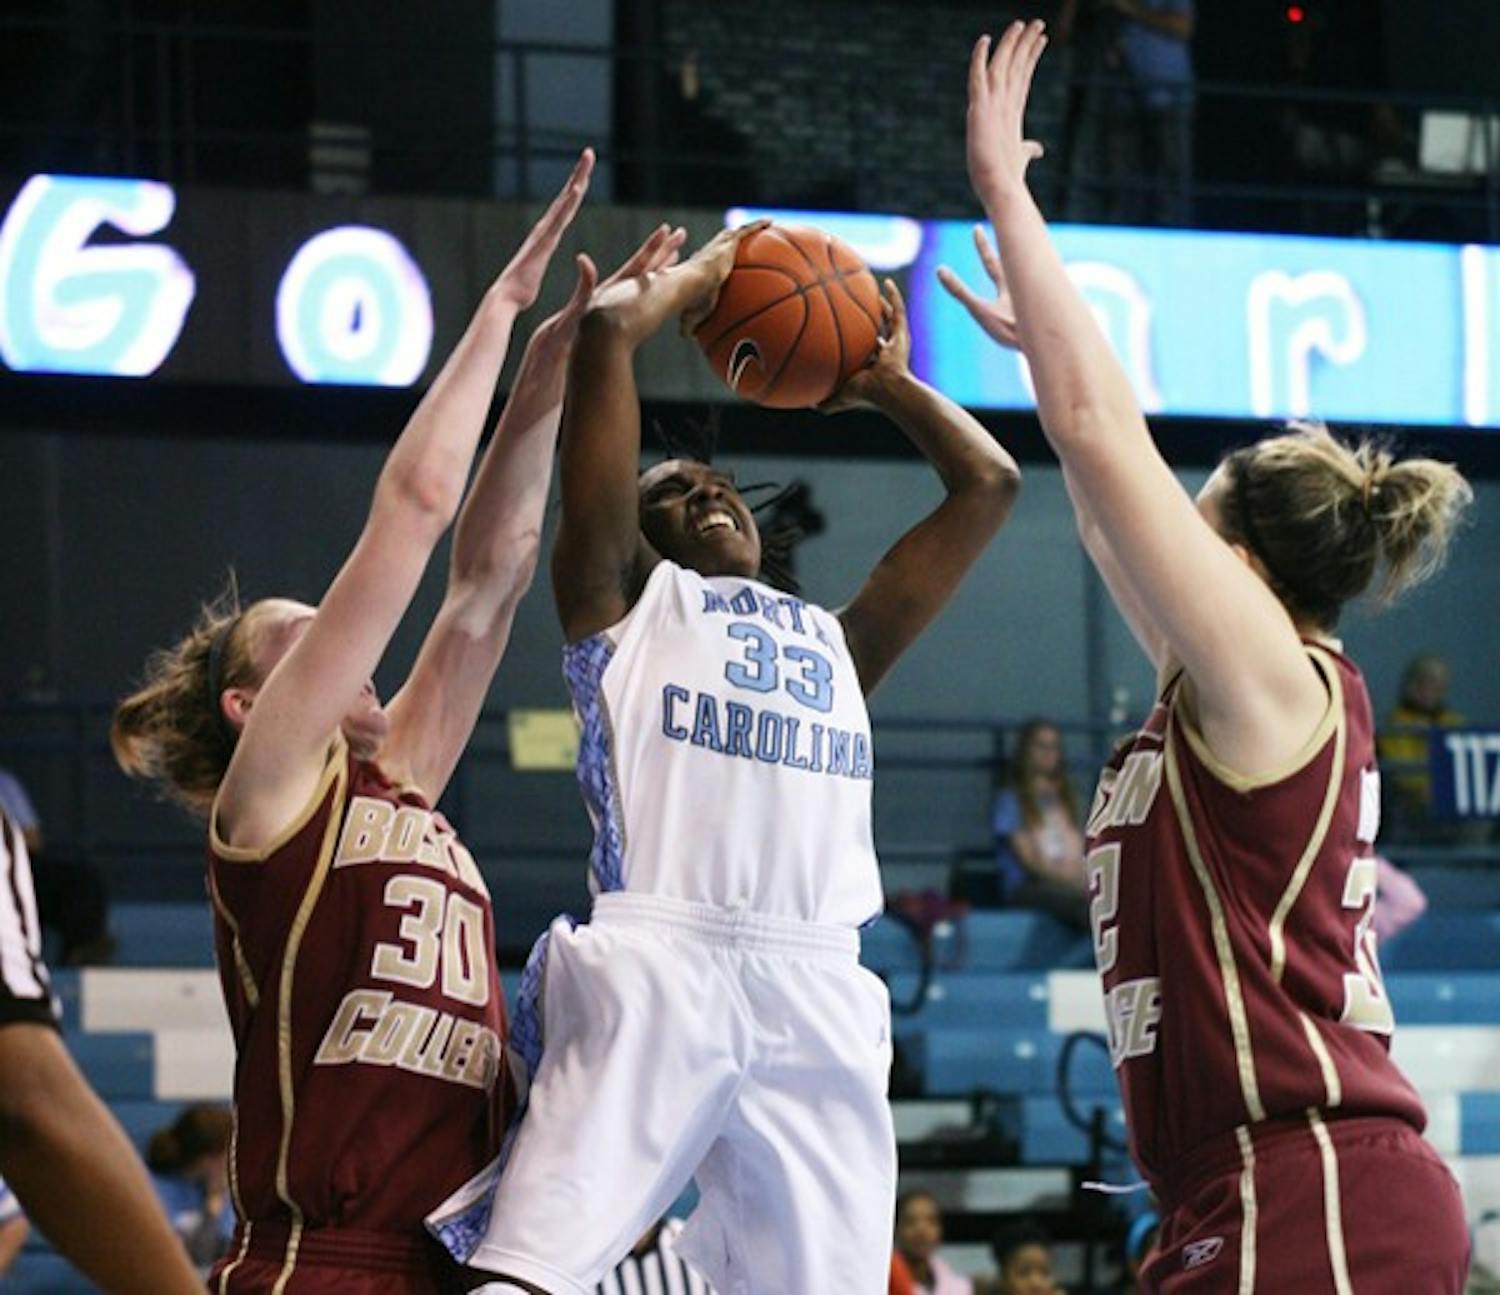 Laura Broomfield goes up for a shot in UNC’s 69-62 loss to Boston College. DTH/Jessey Dearing